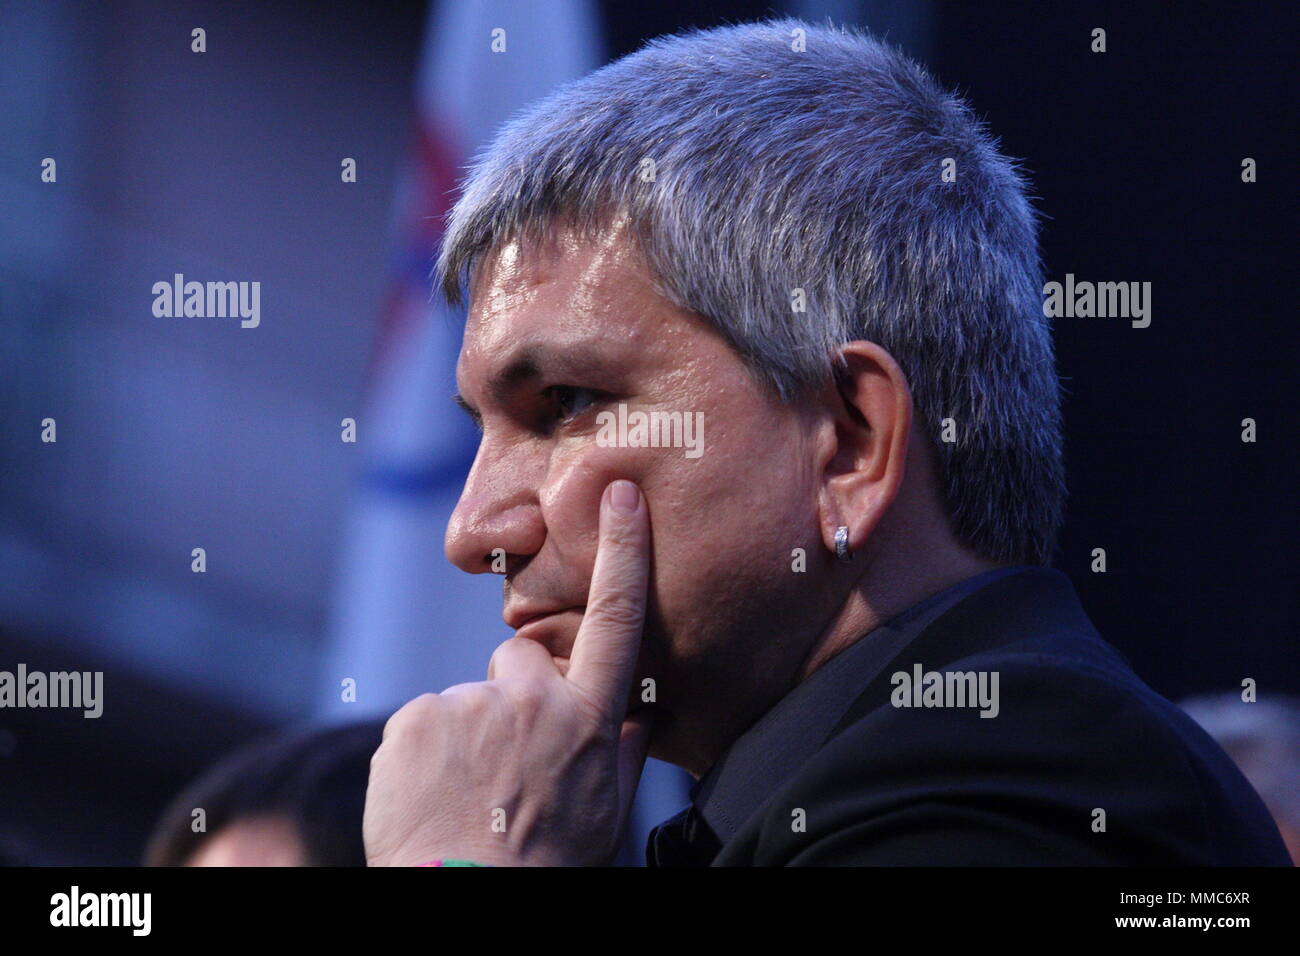 Nichi Vendola in Cassino on 21/5/2011 to support the candidate for mayor Petrarcone Stock Photo